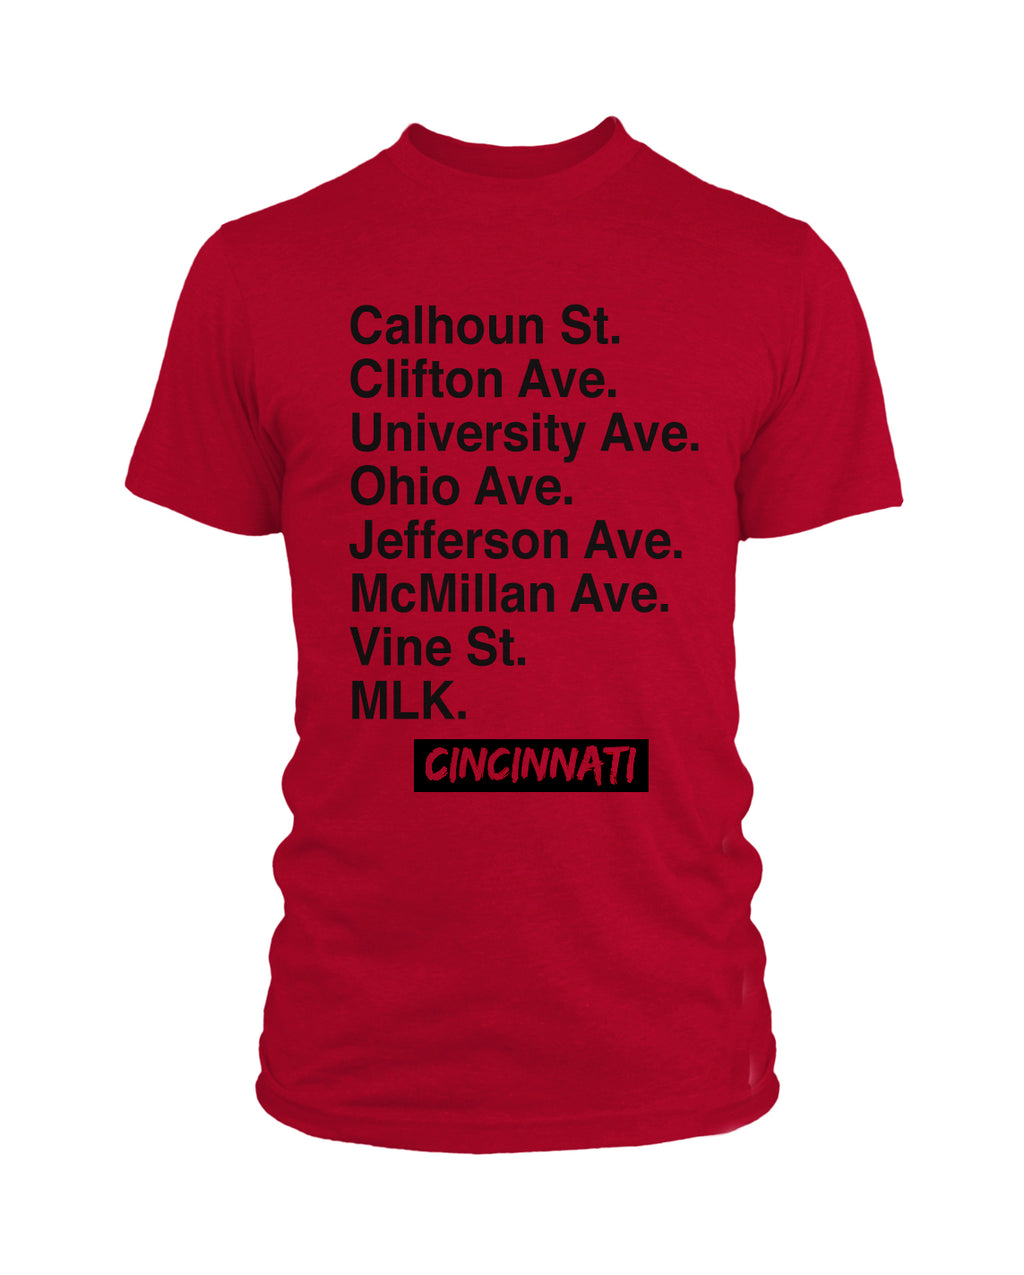 Show Your Local Pride Bond with Hill - Shirt Yours Streets Today! Originalitees Get –